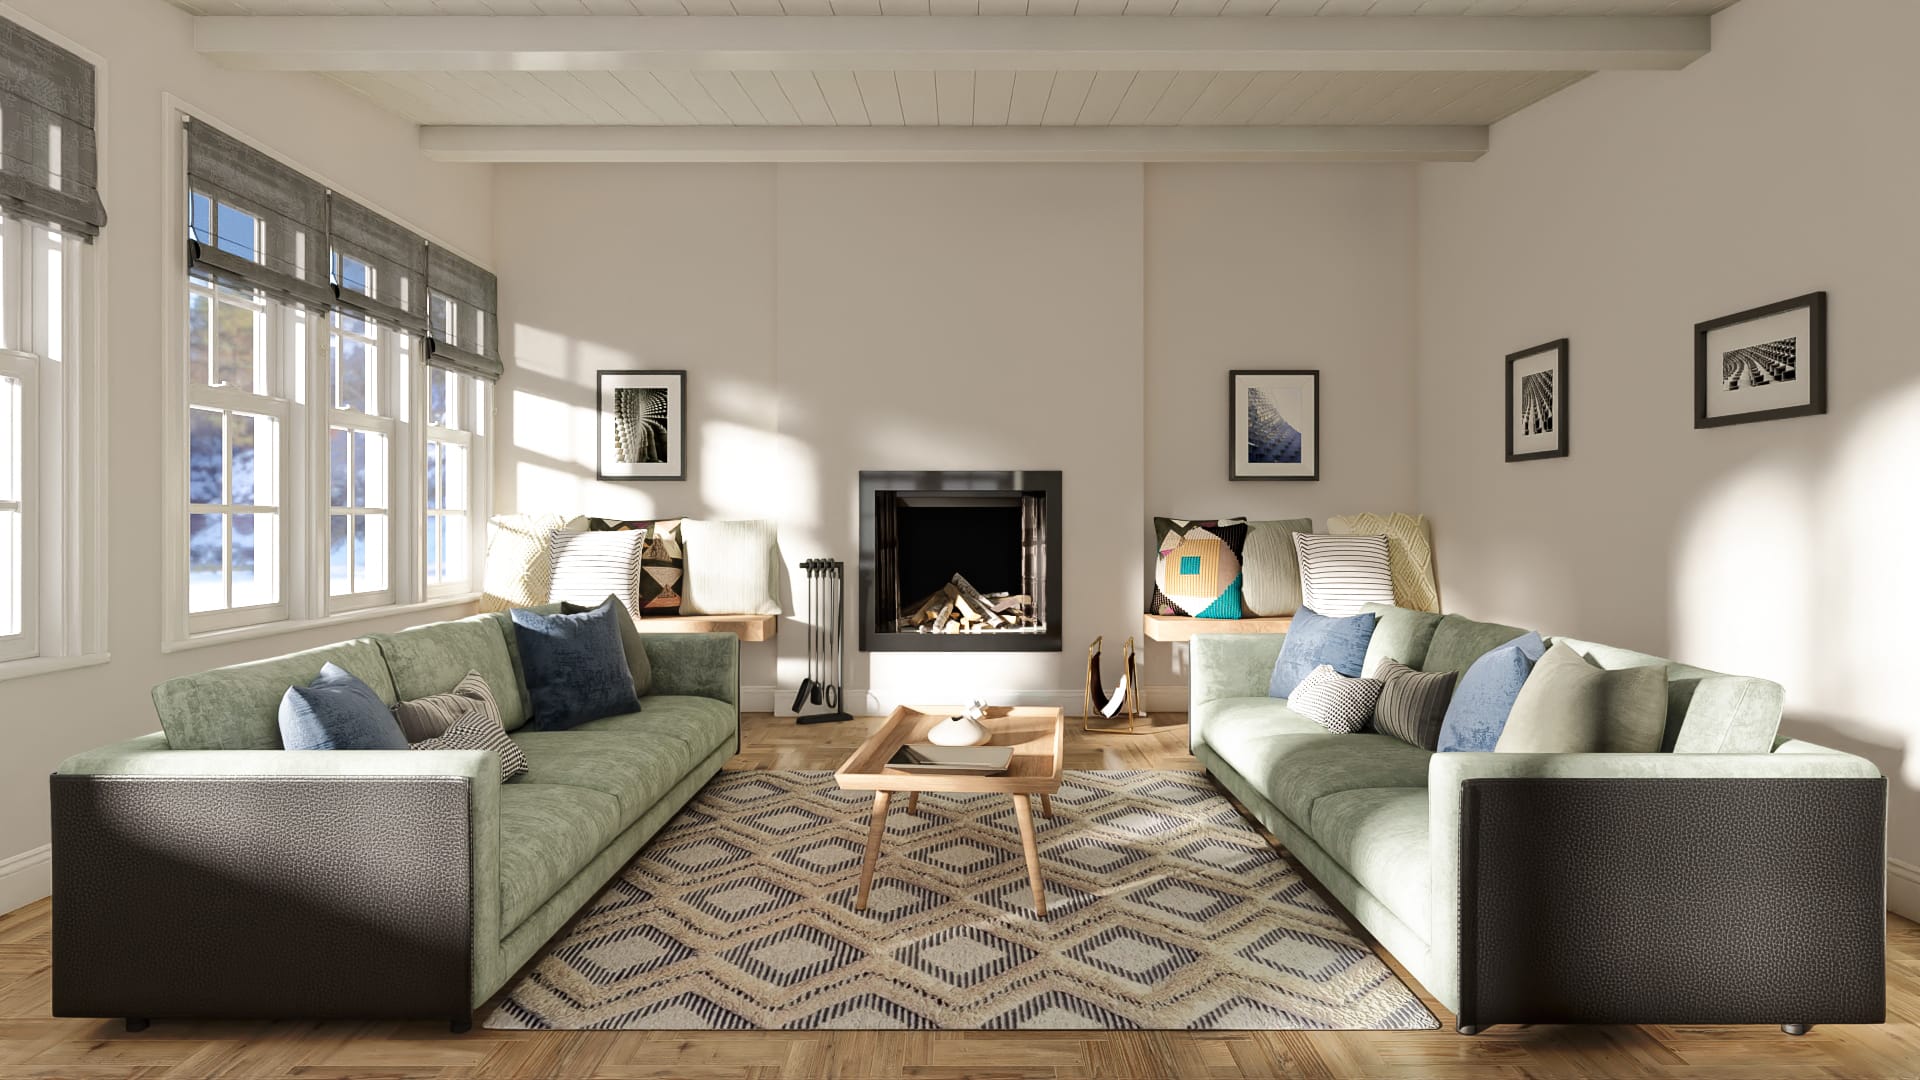 Modern living room with green sofas and accent rug painted in Downy by Sherwin Williams.